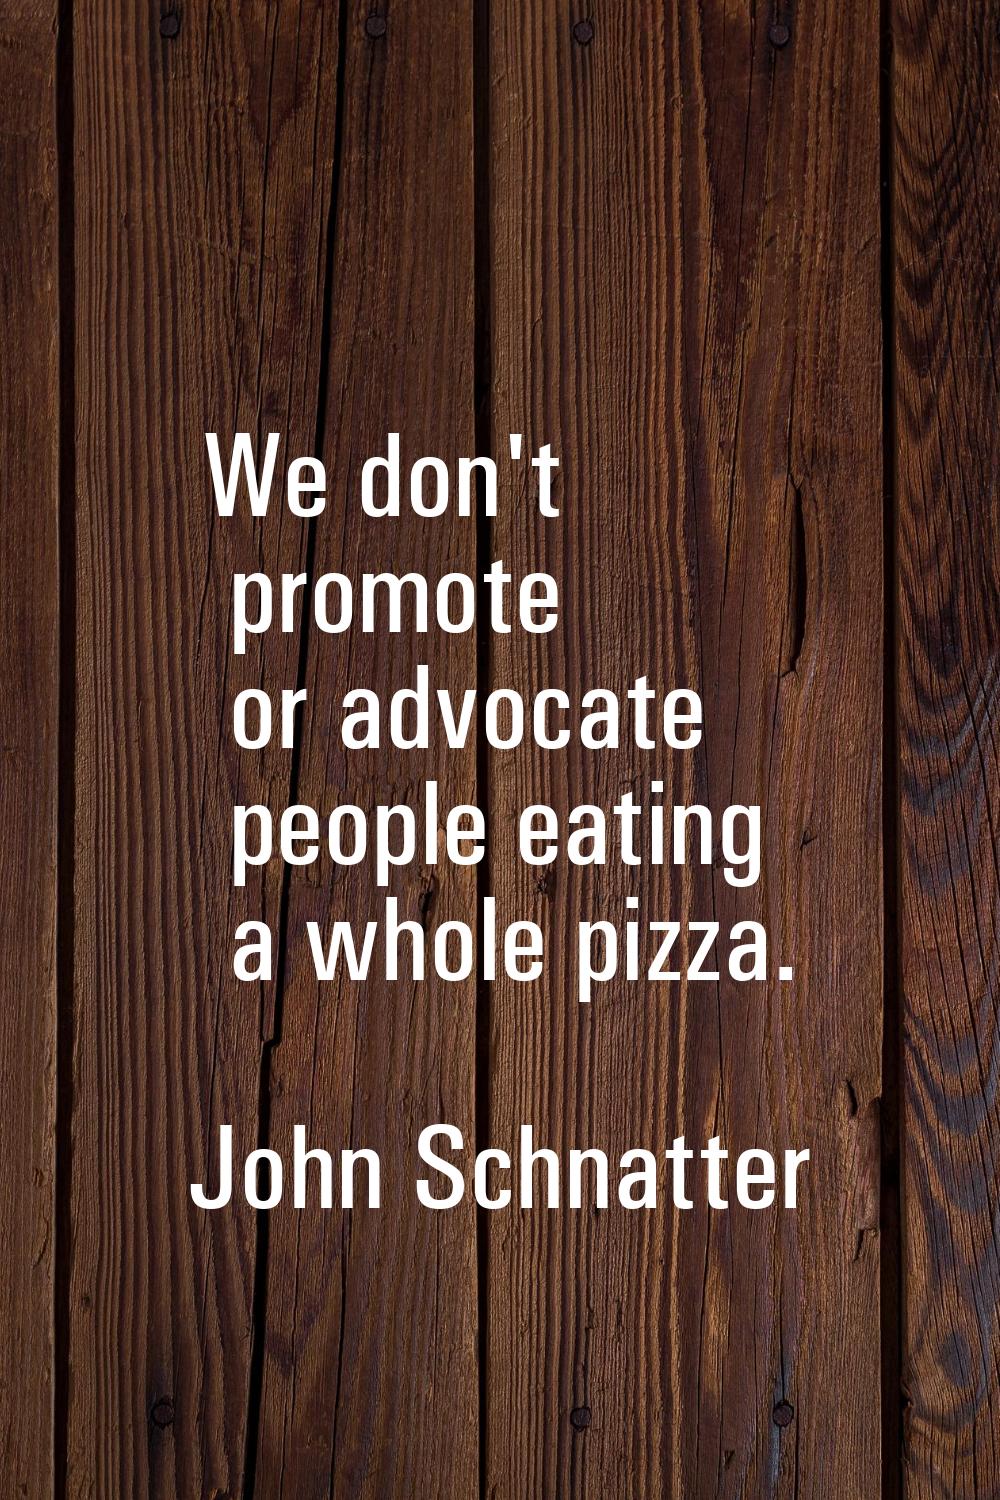 We don't promote or advocate people eating a whole pizza.